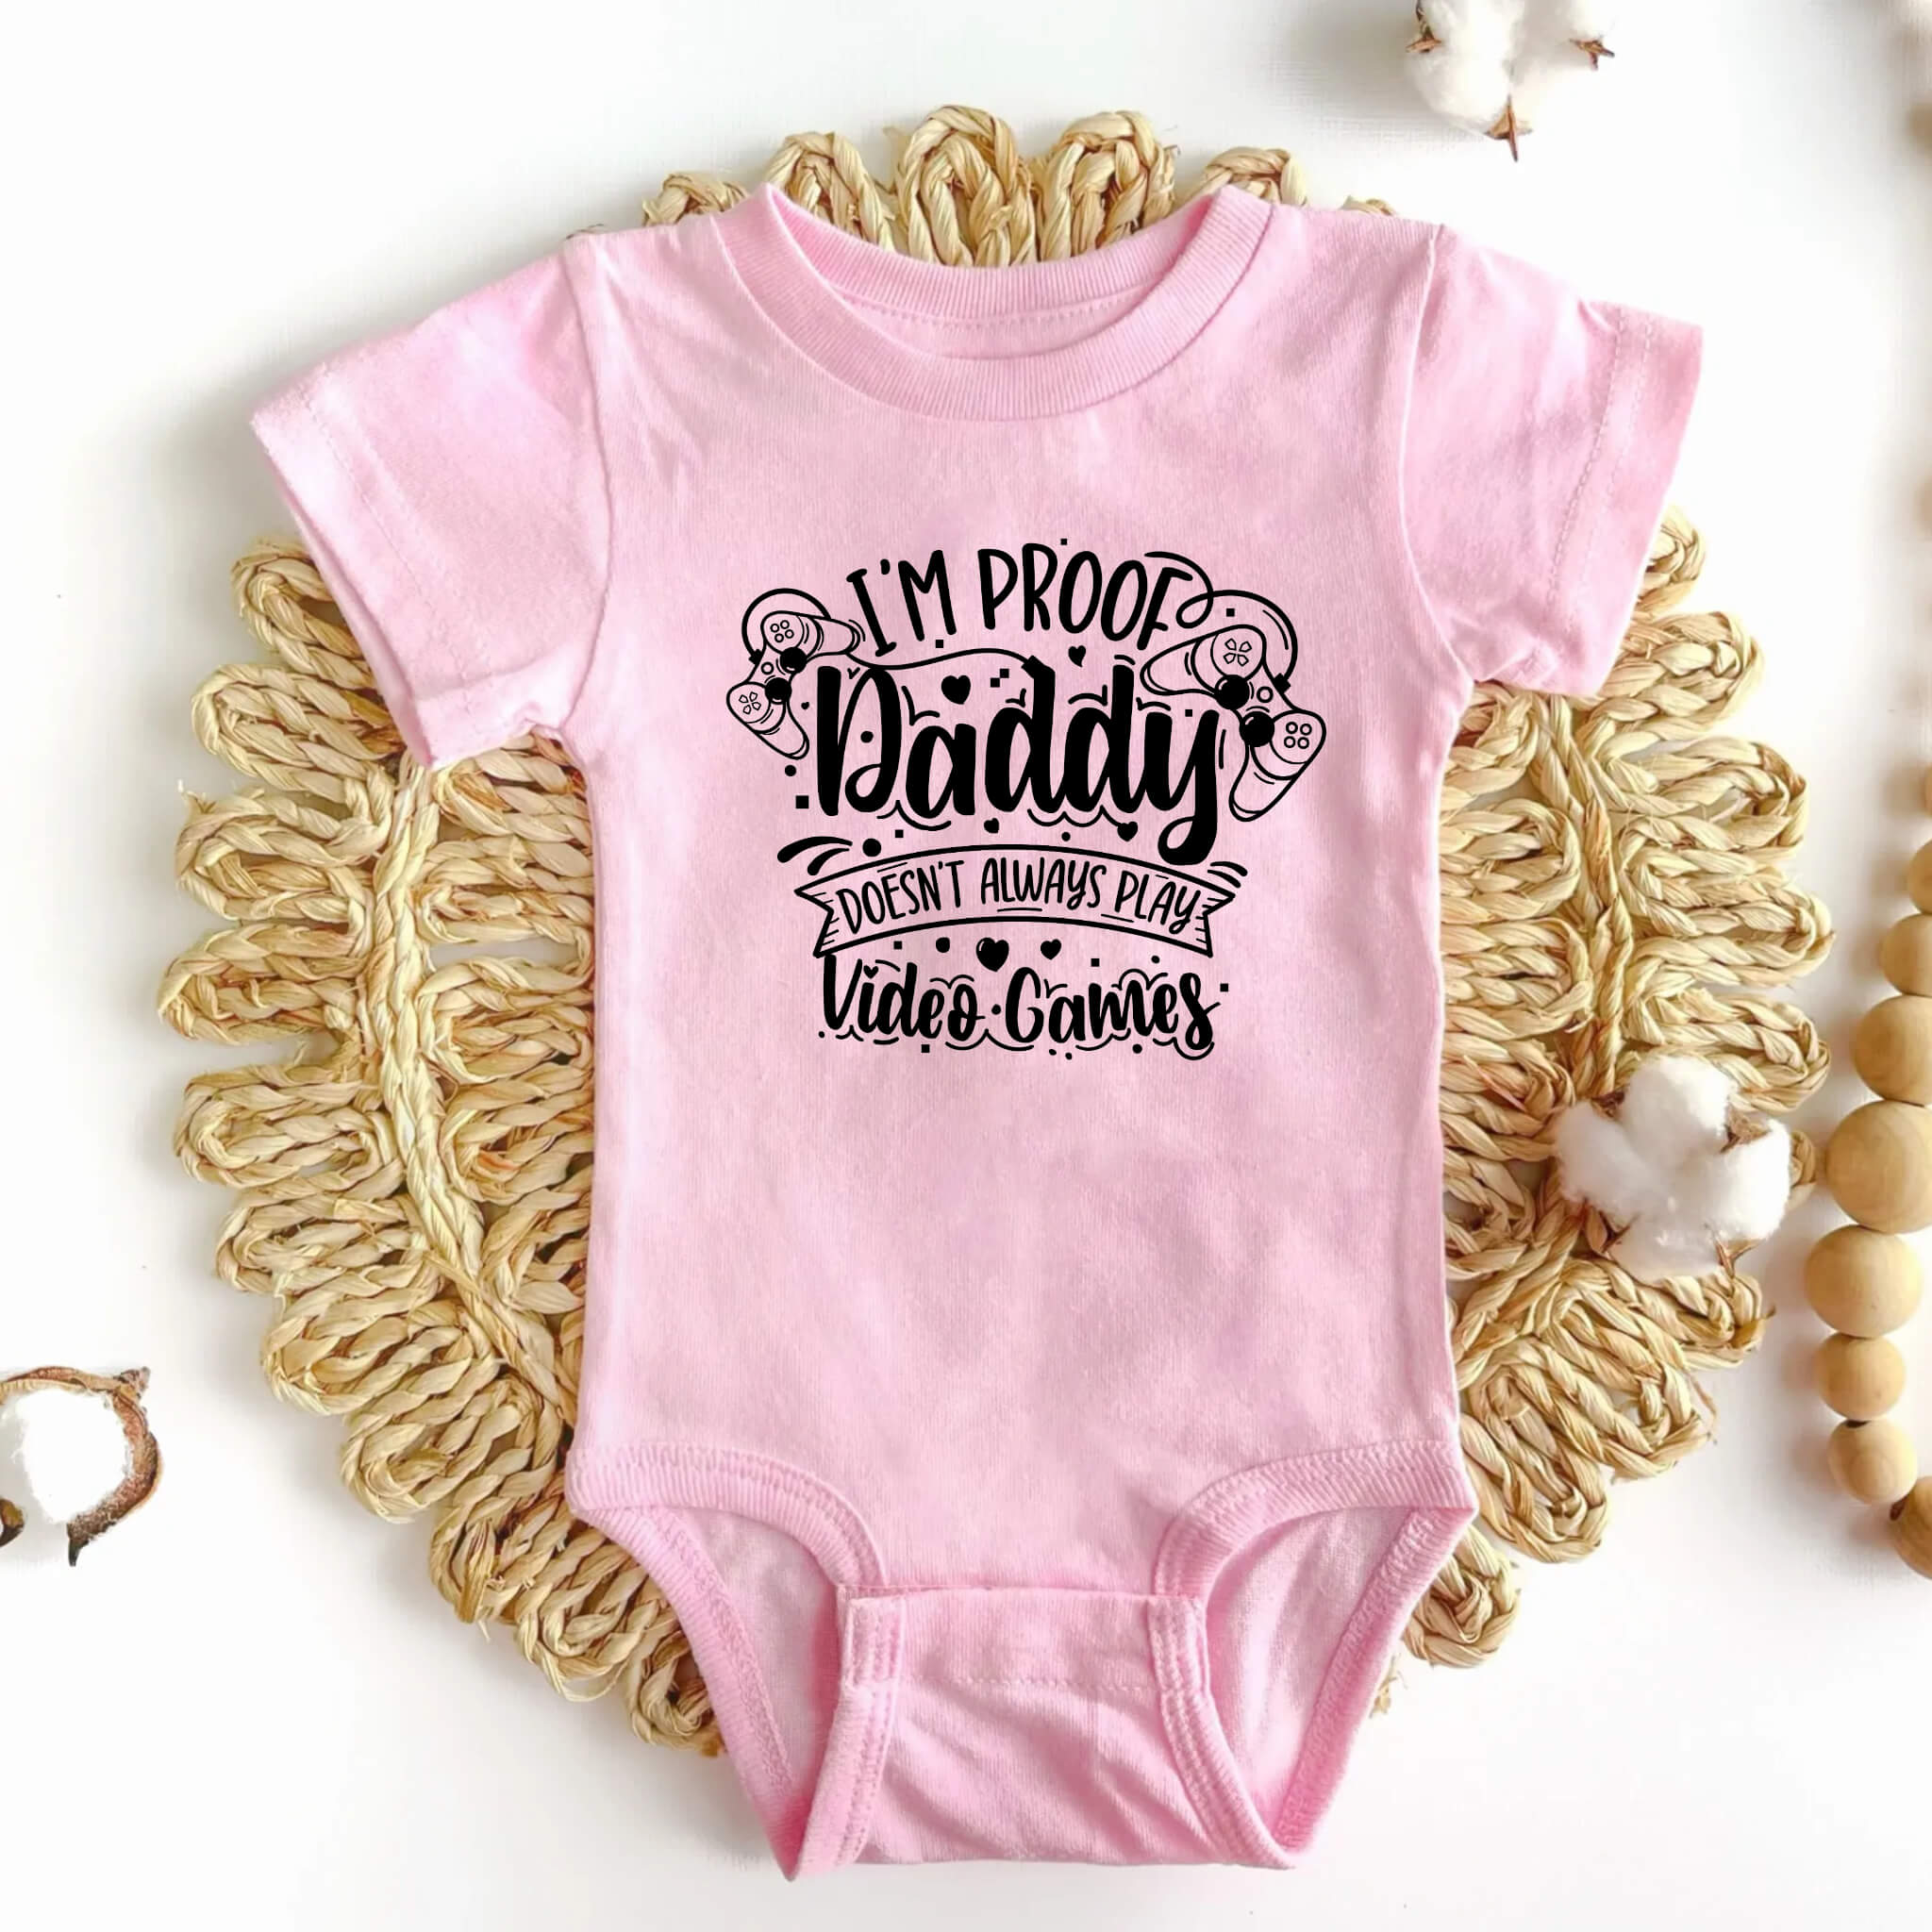 New Baby Onesie, I’m Proof Daddy Doesn’t Always Play Video Games Baby Bodysuit, Boy’s, Girl’s Baby Shower Gift, New Baby Take Home Outfit, Maternity Photo Prop Onesie, Video Gamer Baby Onesie Outfit